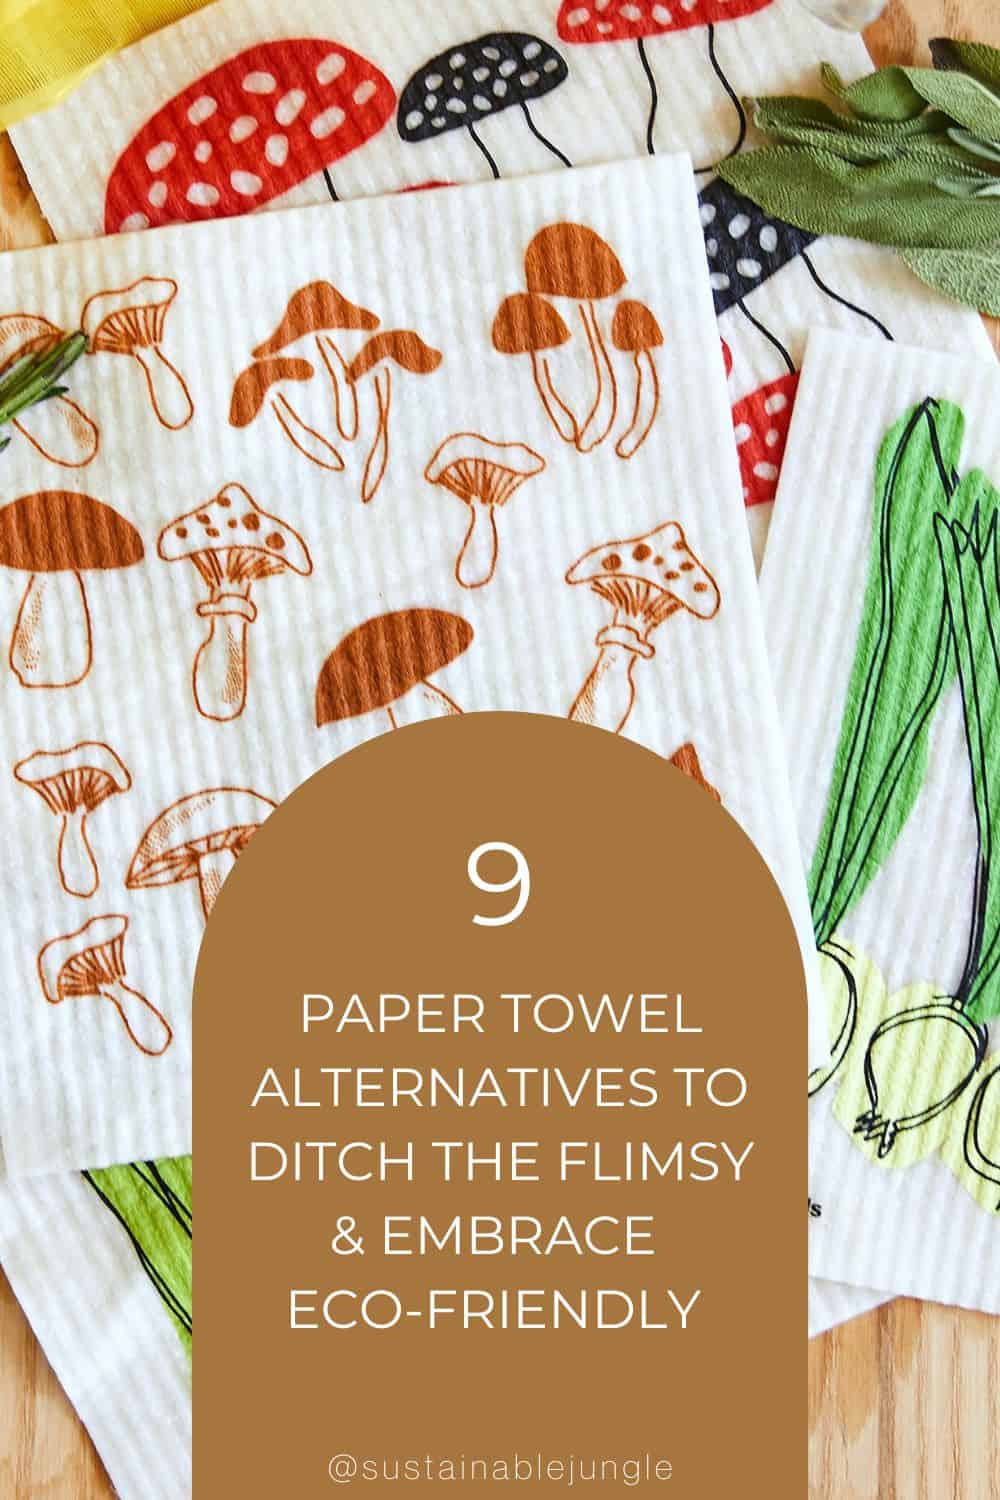 9 Paper Towel Alternatives To Ditch The Flimsy & Embrace Eco-Friendly Image by Package Free Shop #papertowelalternatives #papertowelreplacements #bestpapertowelalternative #whattouseinsteadofpapertowels #swedishpapertowelalternative #sustainablejungle